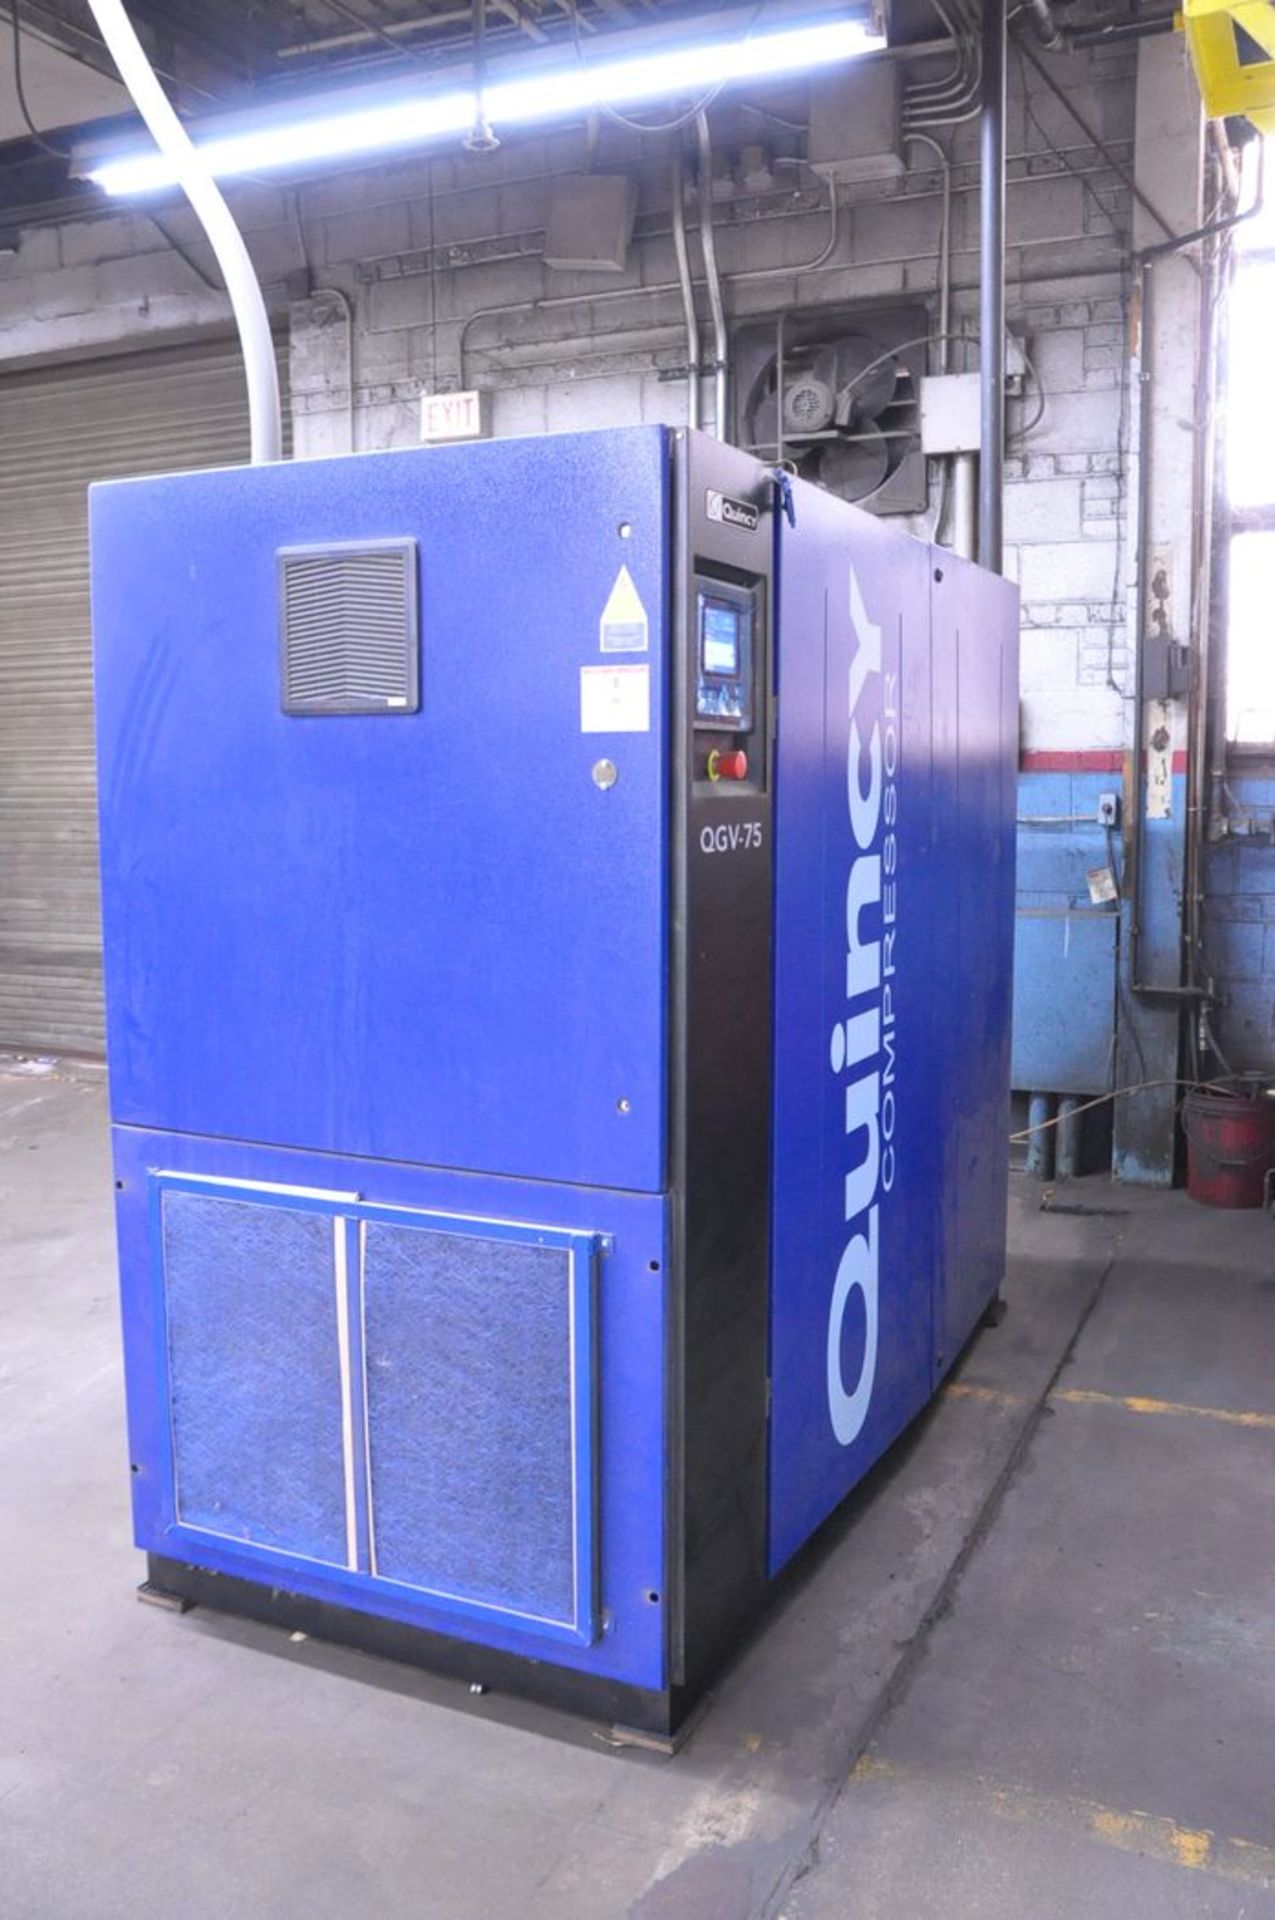 Quincy 75-HP Model QGV-75A150 Rotary Screw Air Compressor, S/N: UTY305489; with 9,900 Hrs. (at